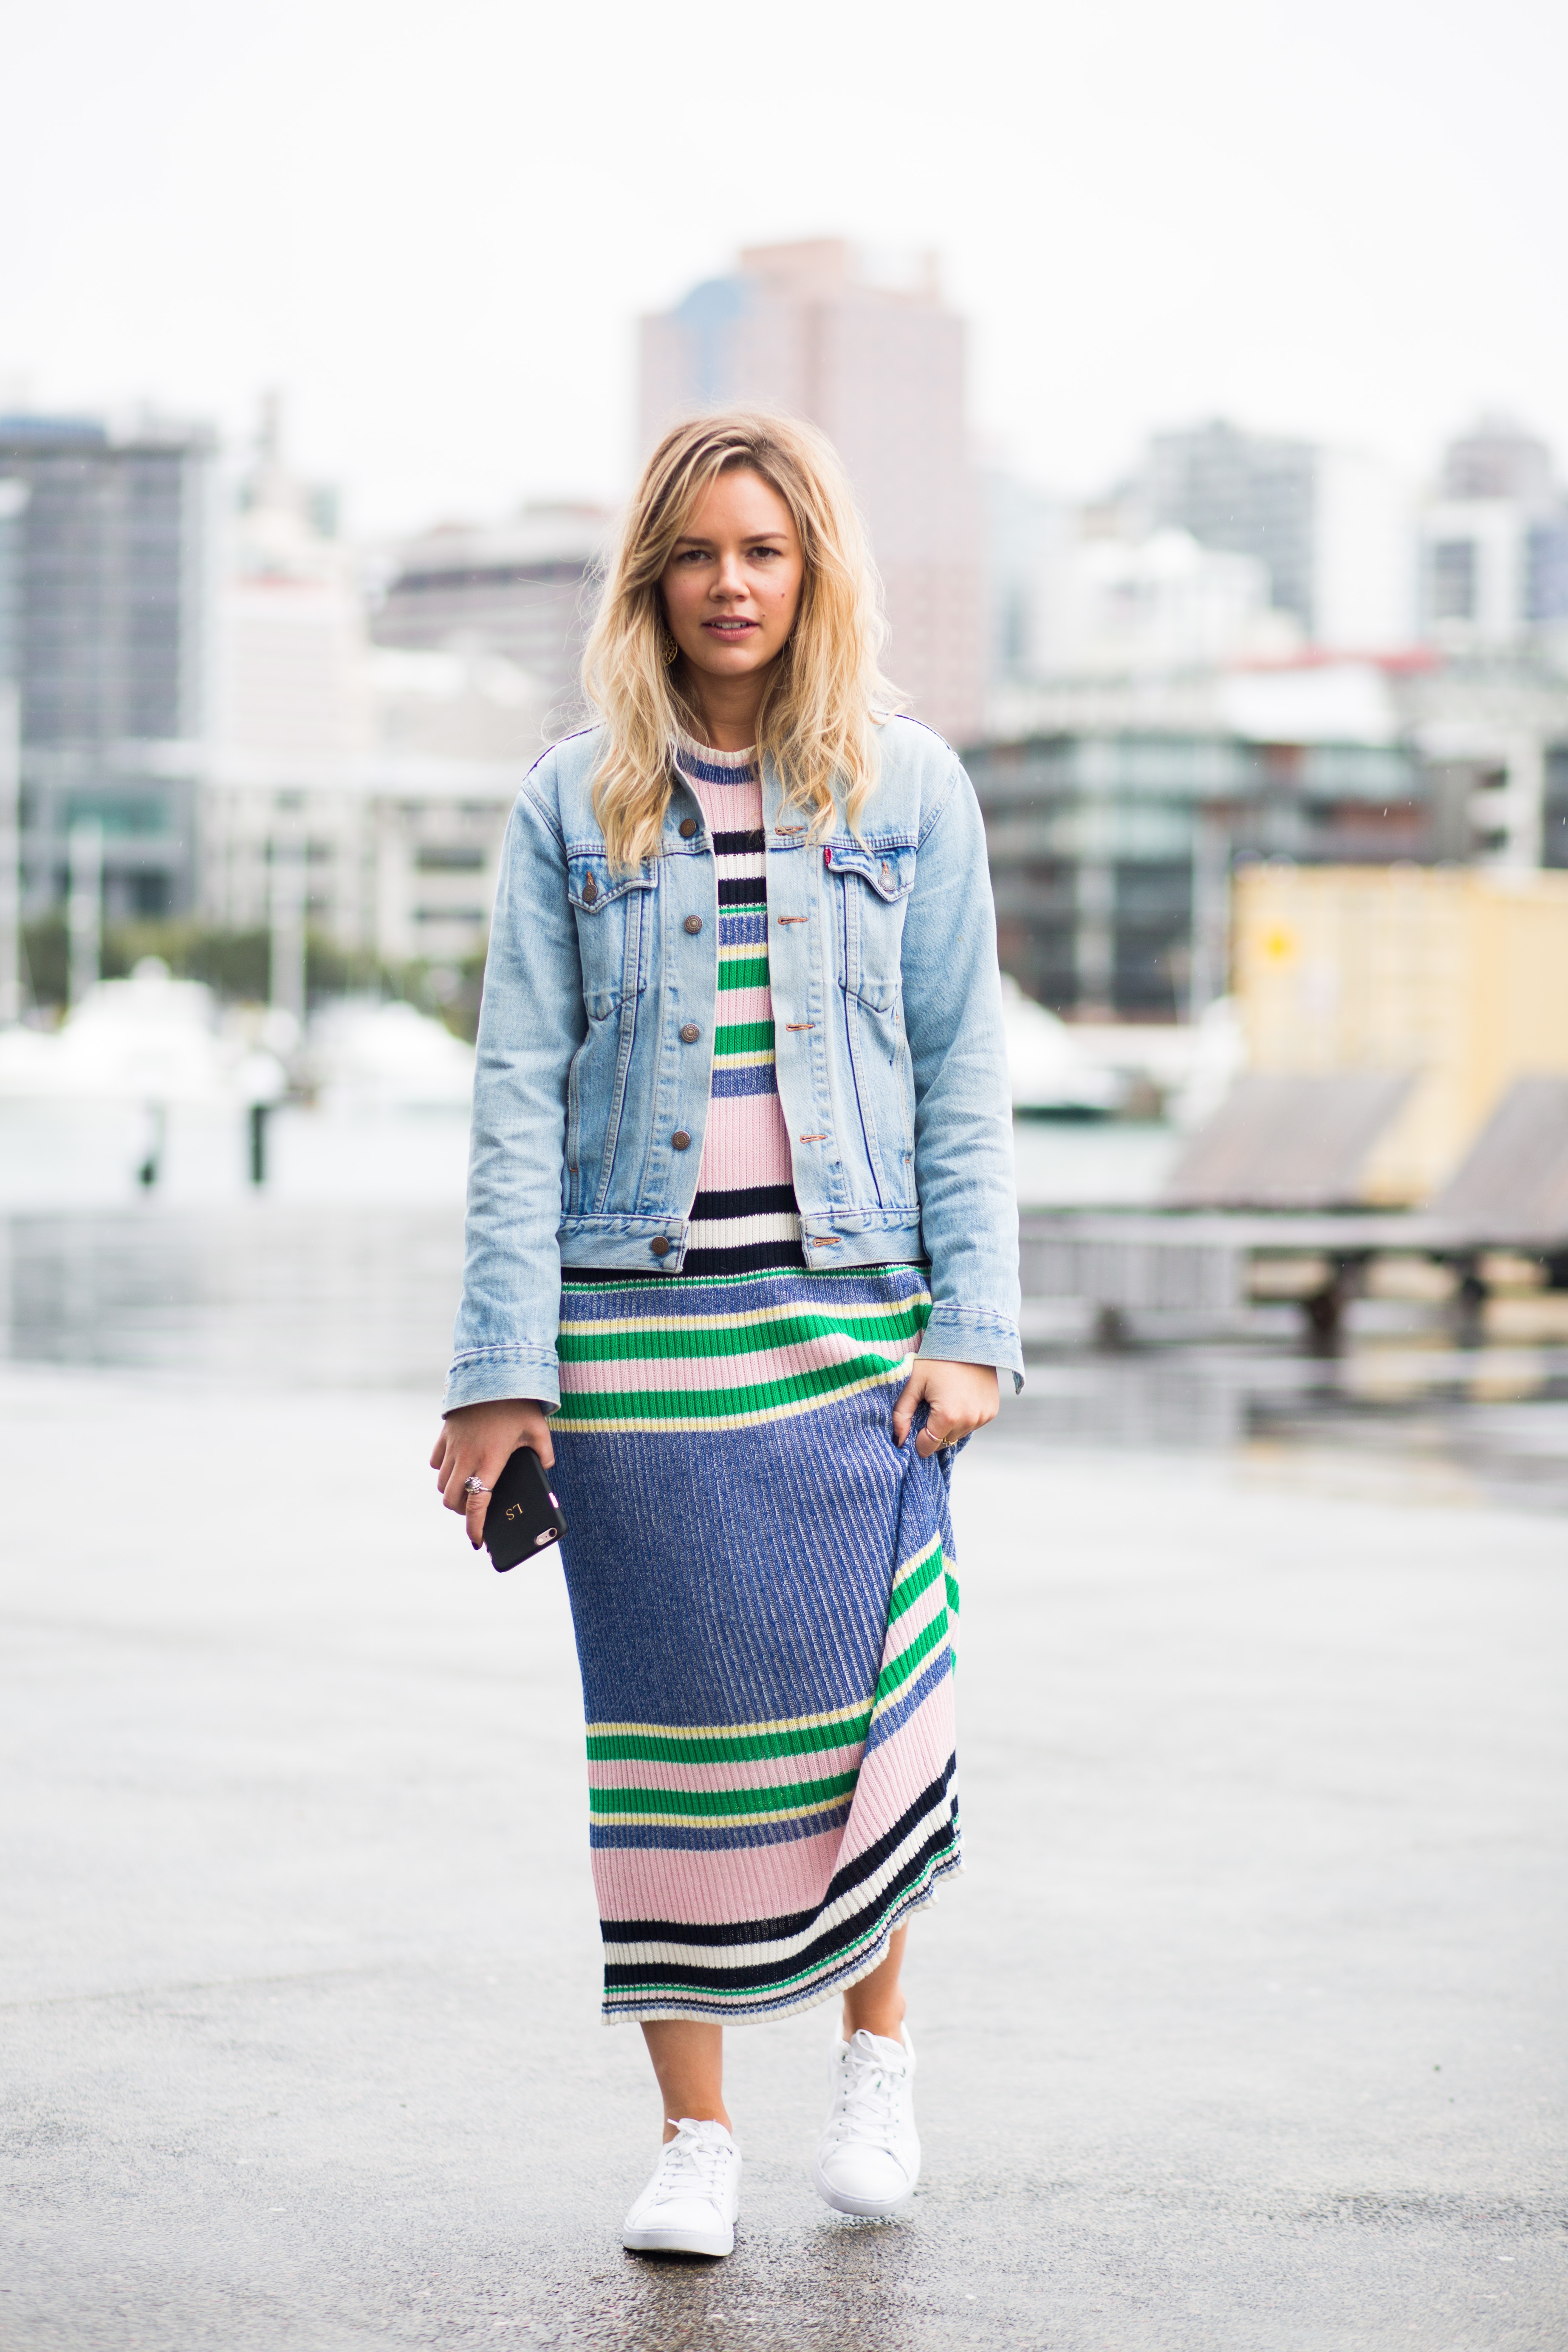 Features and beauty editor Lucy wears Nice Martin dress and vintage Levi's denim jacket.